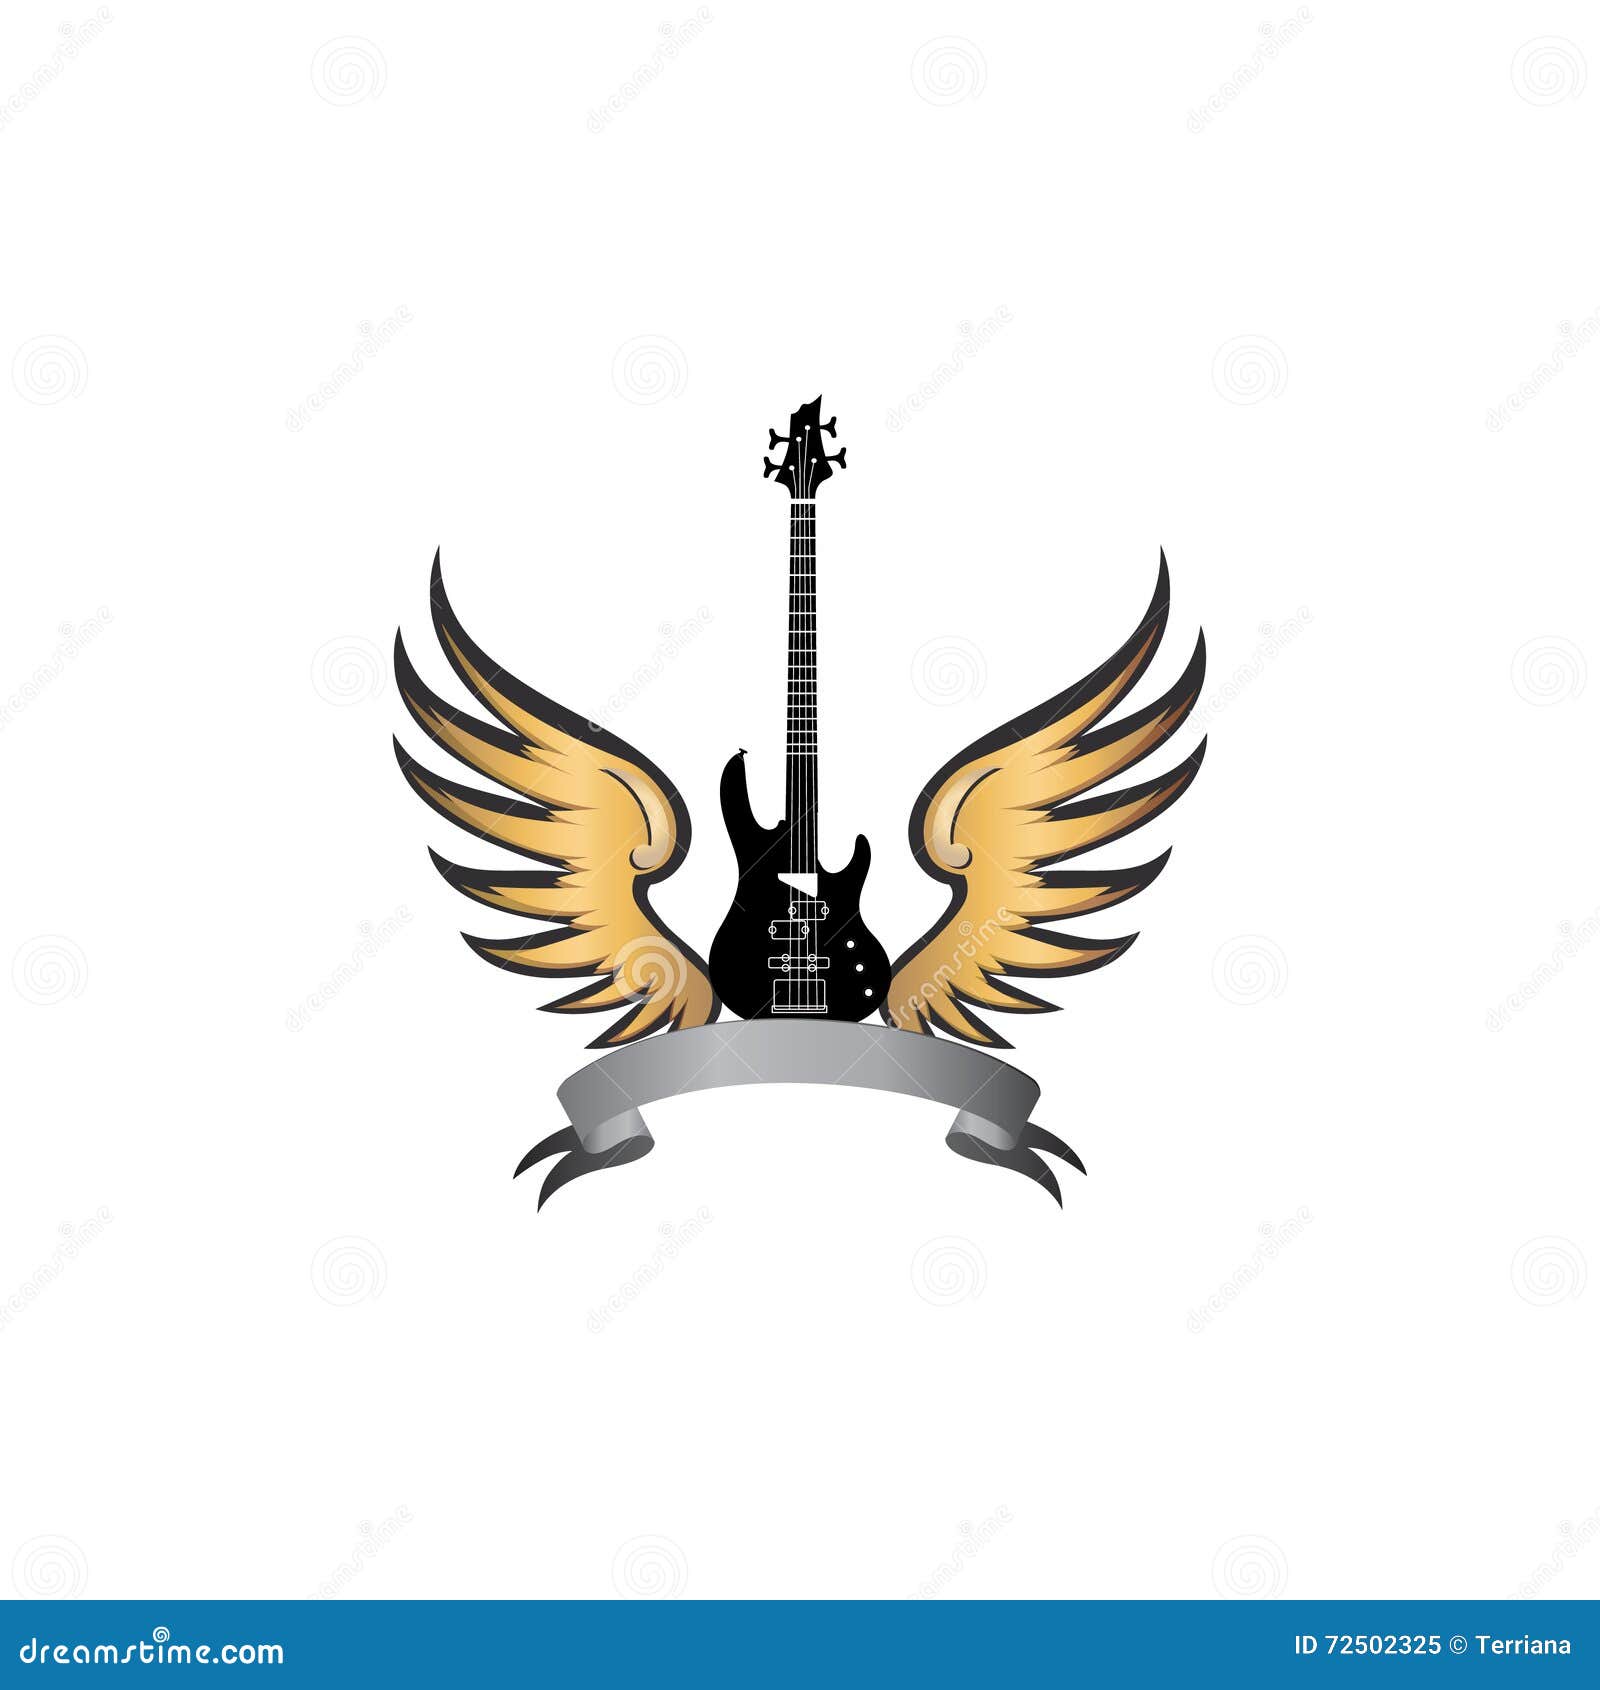 Rock Music Electric Guitar with Wings. Winged Guitar Sign Stock Illustration Illustration of black, bird: 72502325